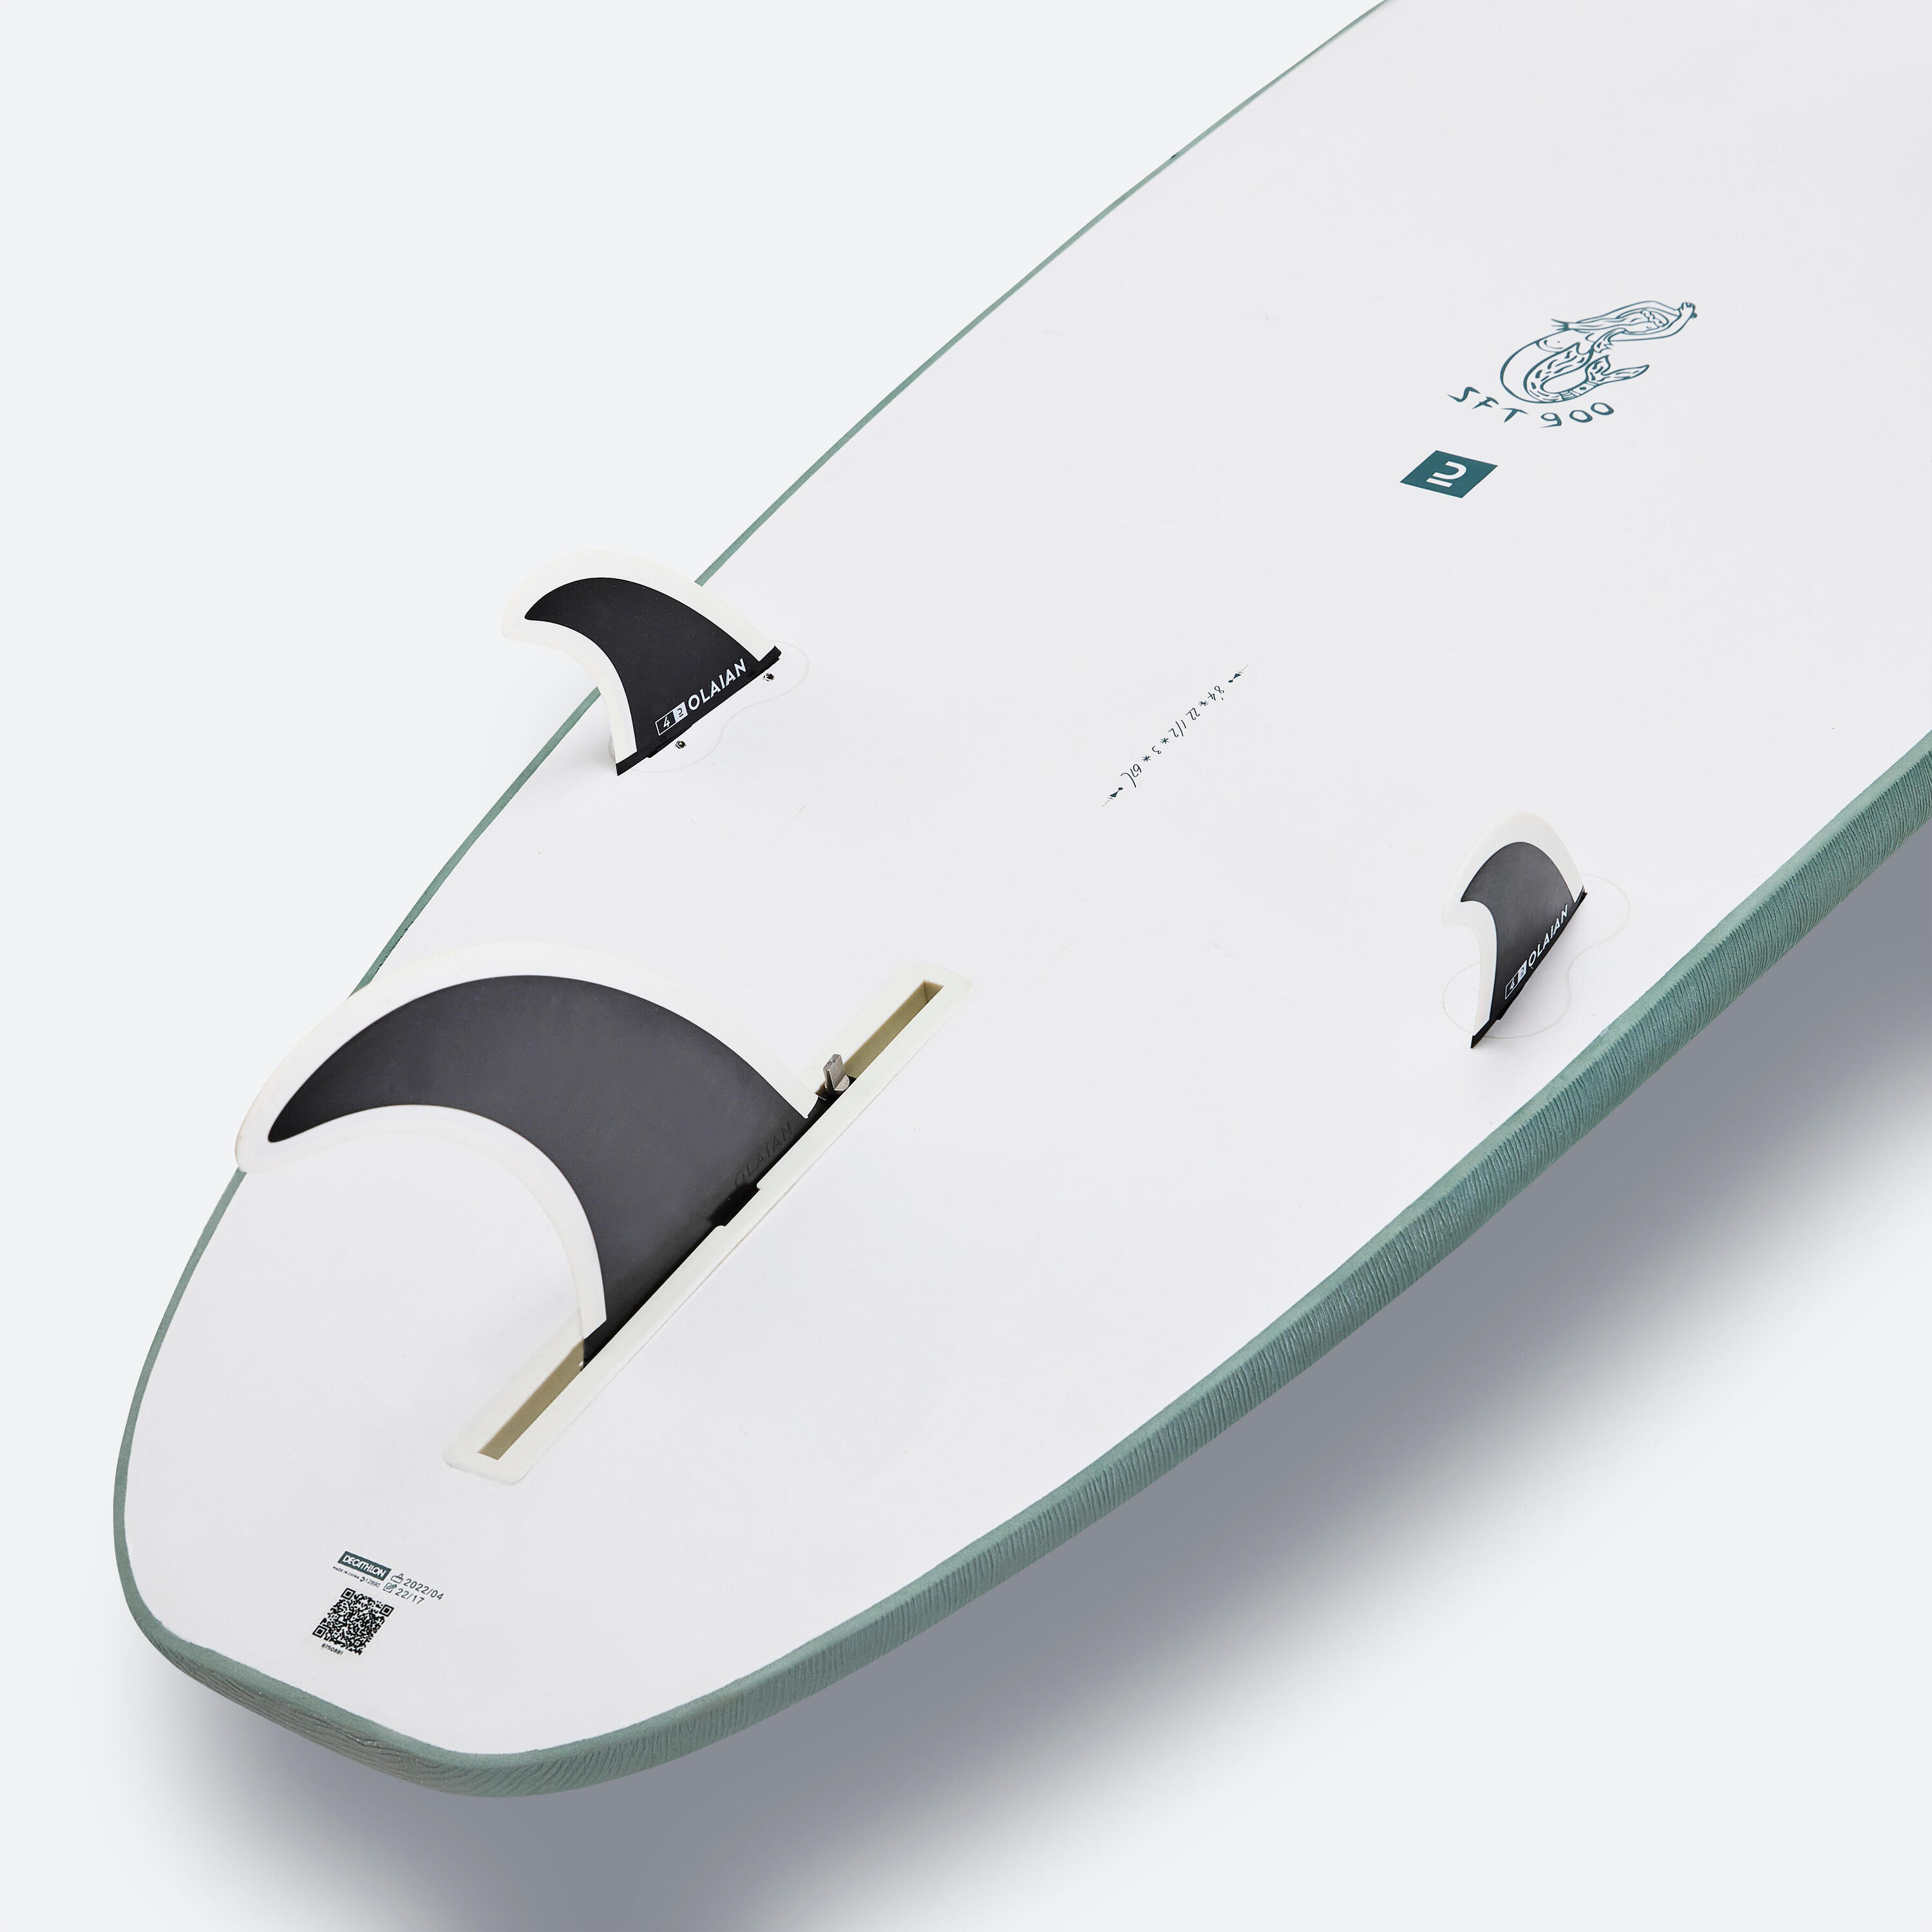 SURFBOARD 900 EPOXY SOFT 8'4 with 3 fins. 8/14